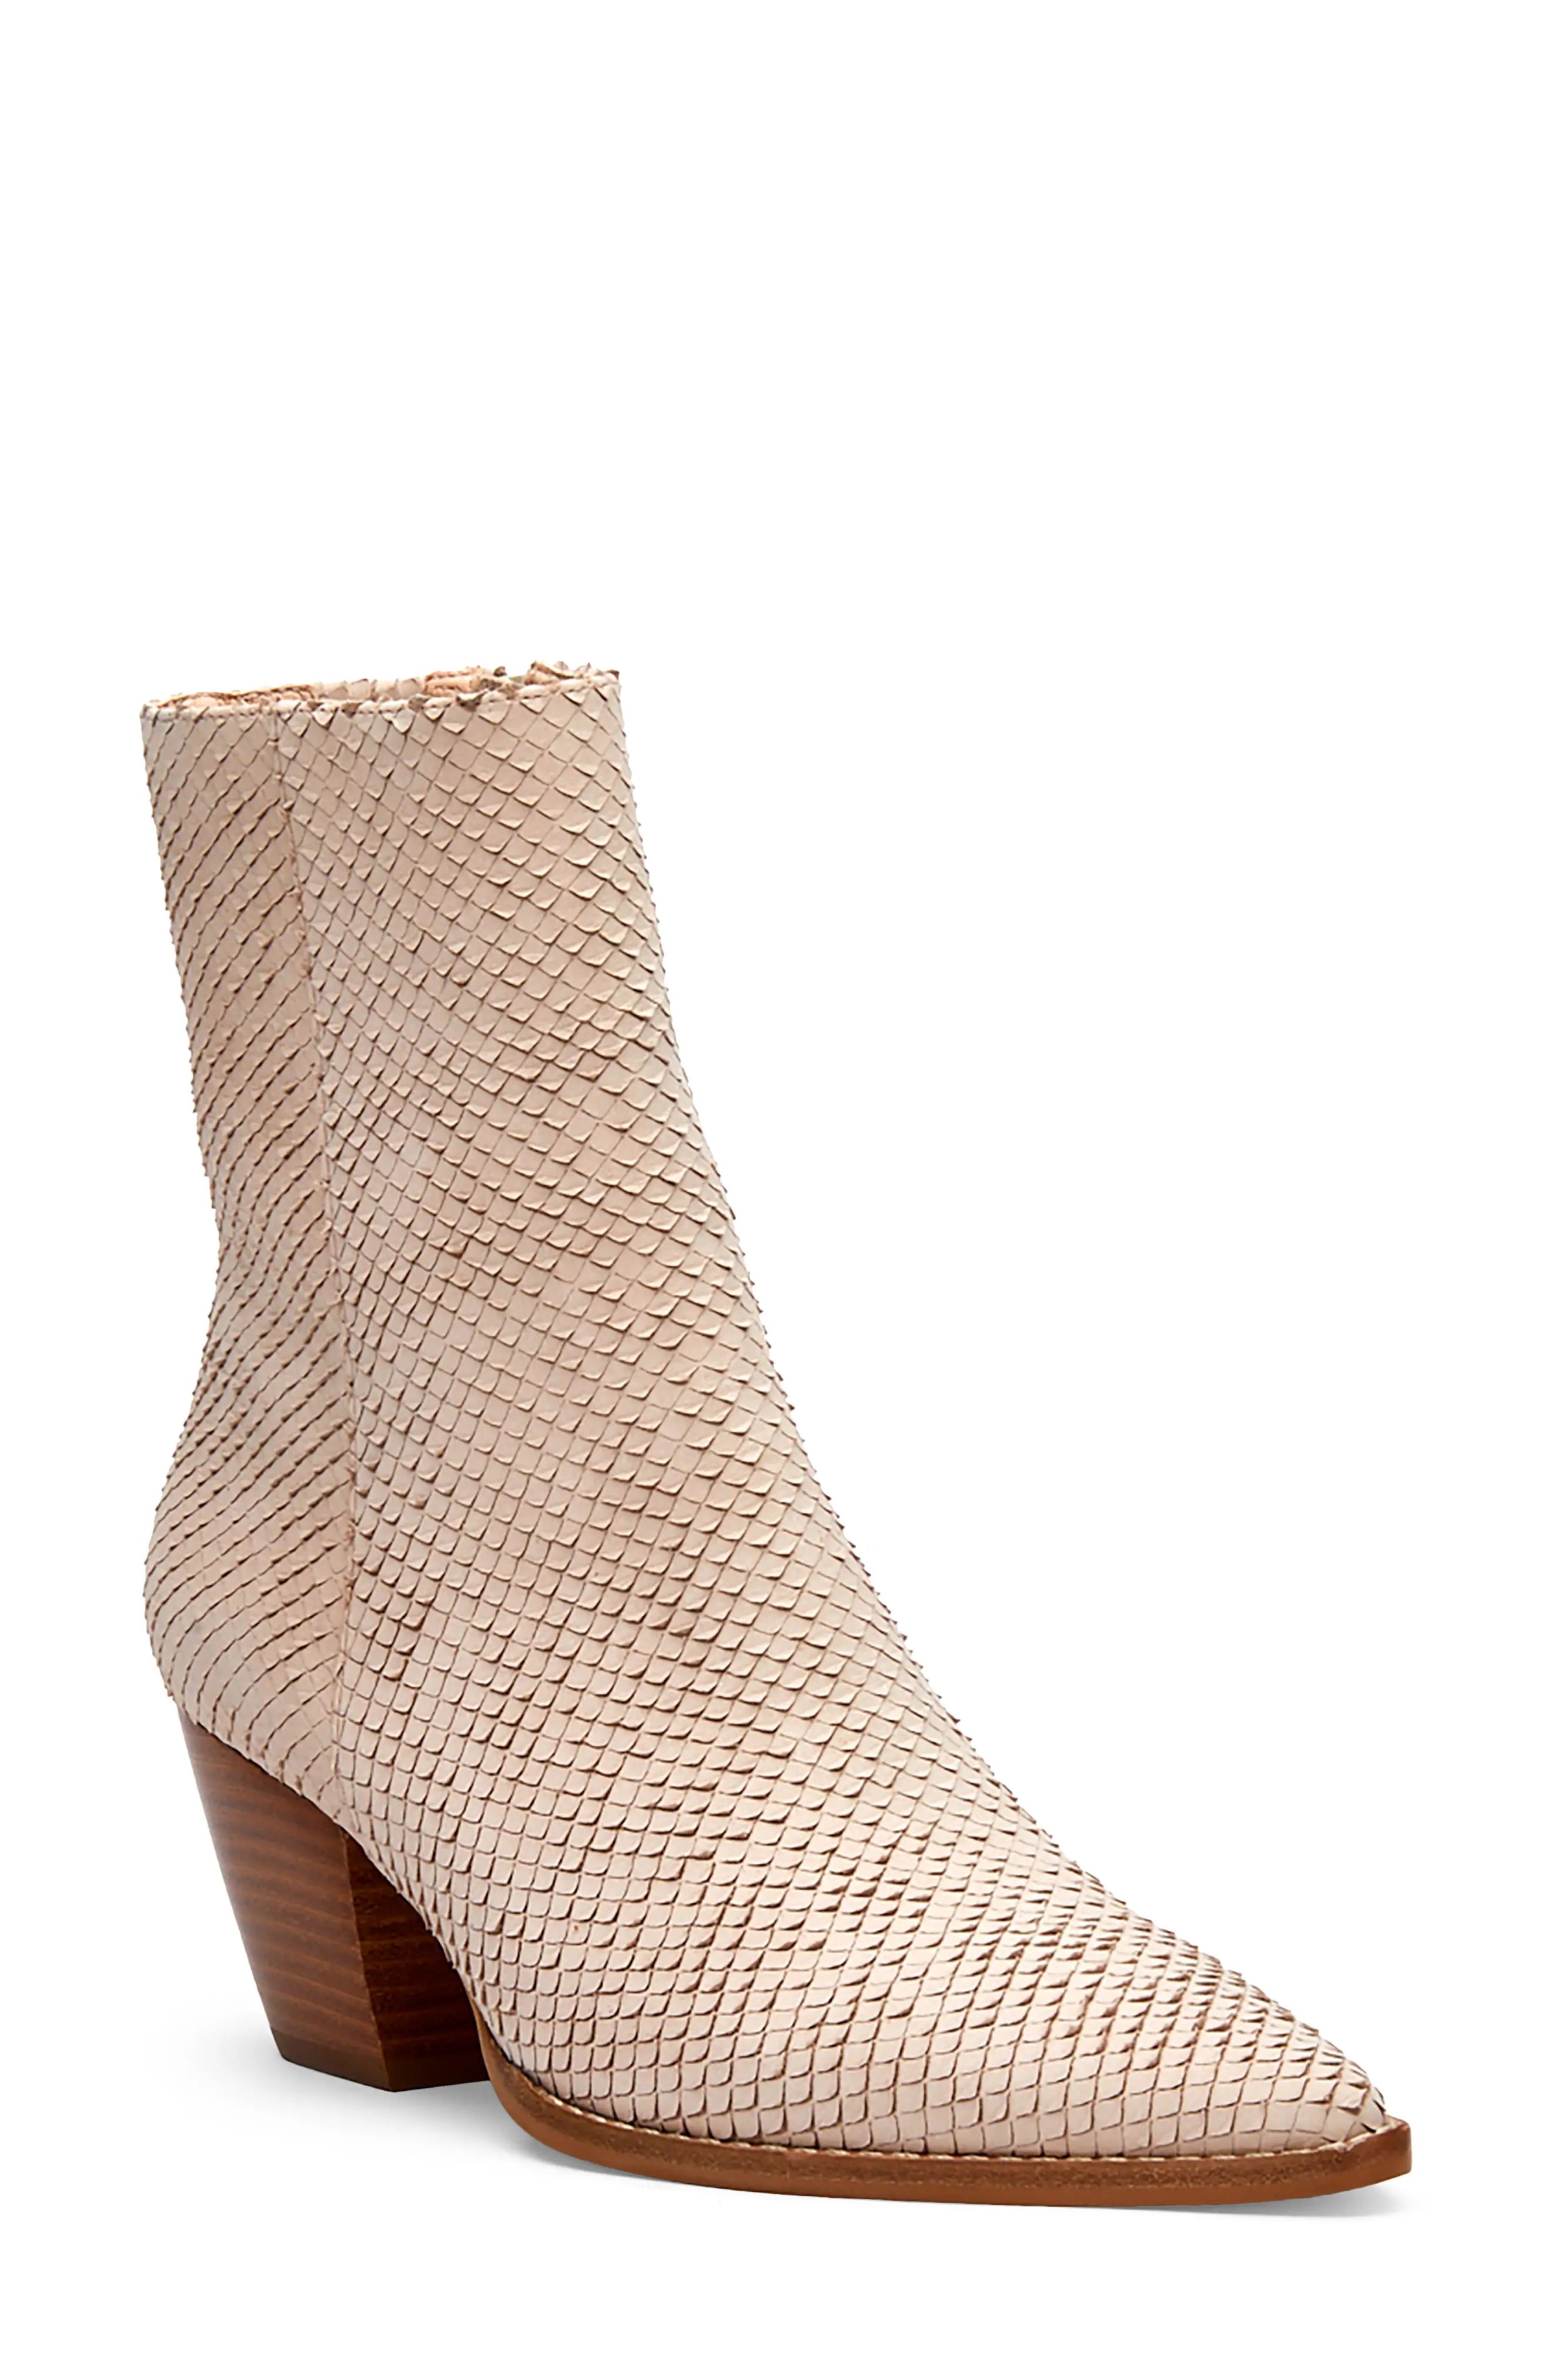 Matisse Caty Western Pointed Toe Bootie in Vintage Tan at Nordstrom, Size 7 | Nordstrom